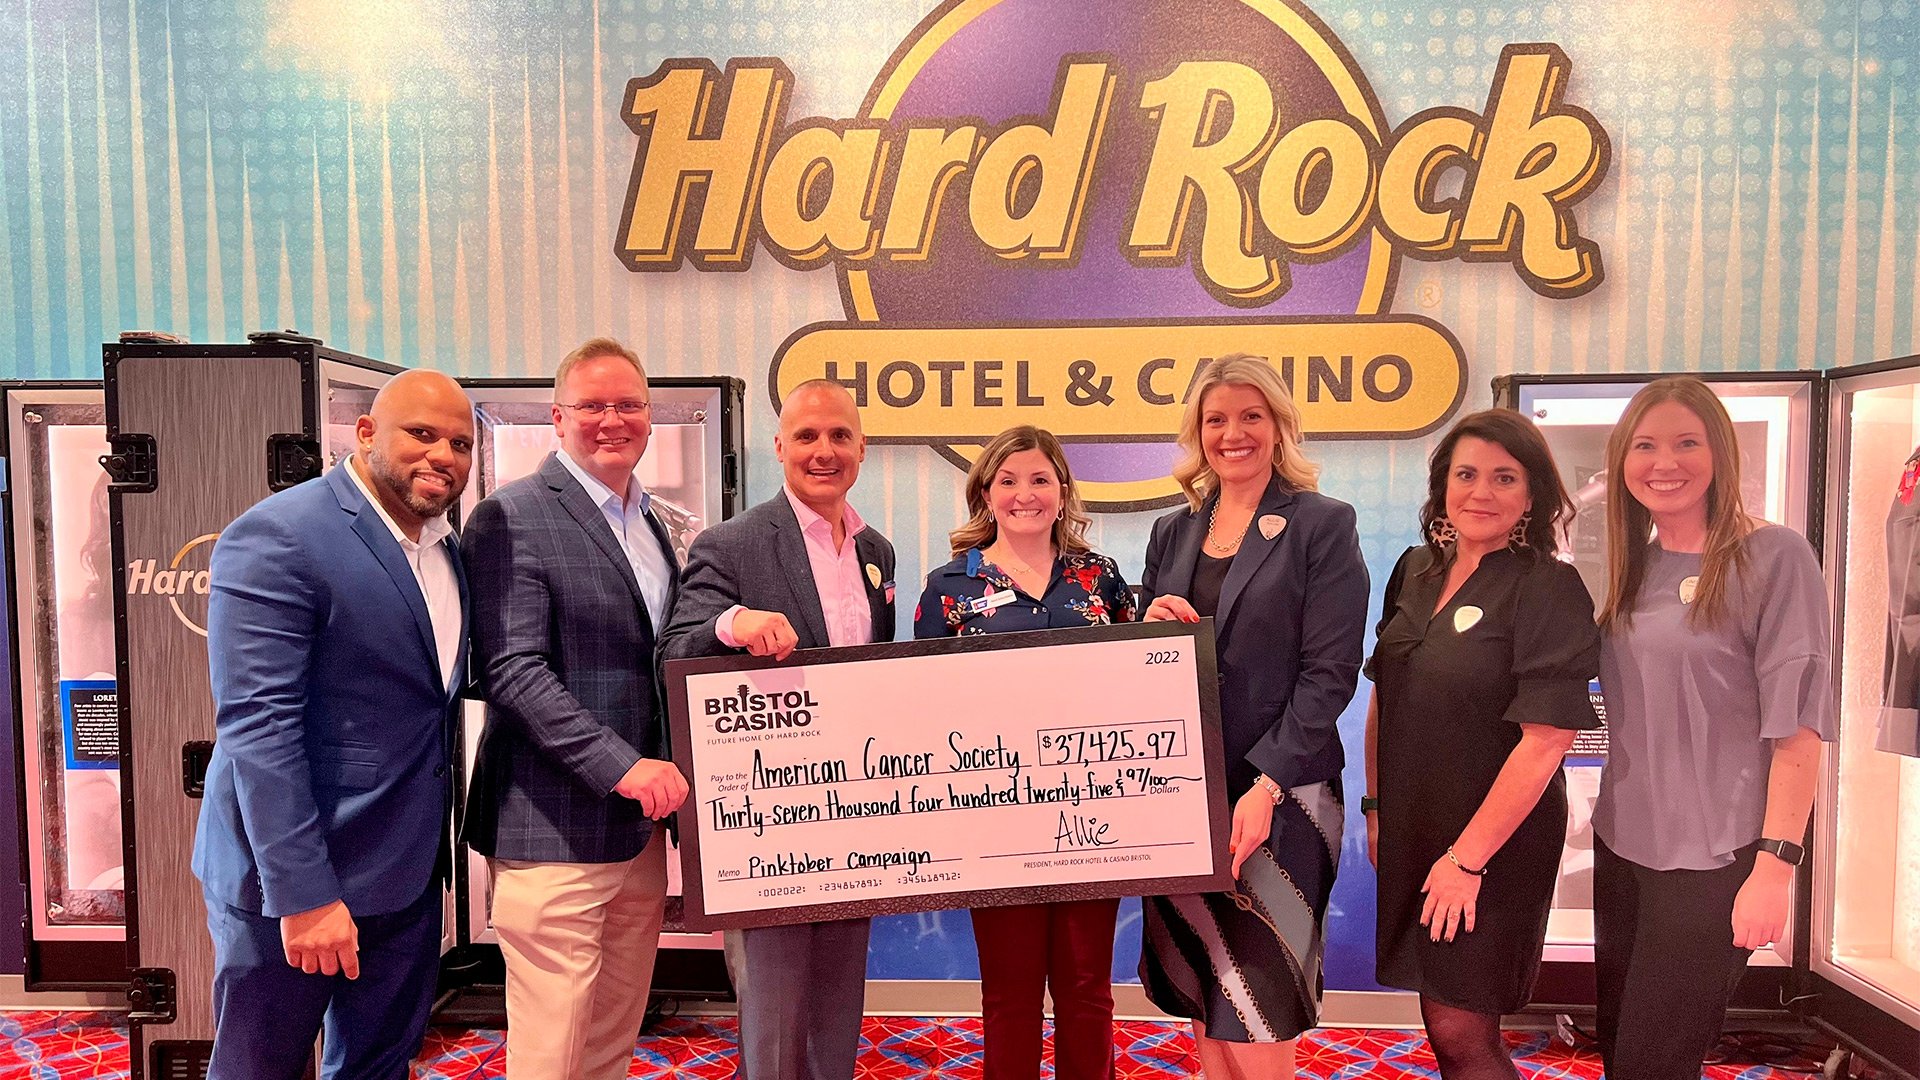 Hard Rock raises M for breast cancer research at its annual PINKTOBER campaign